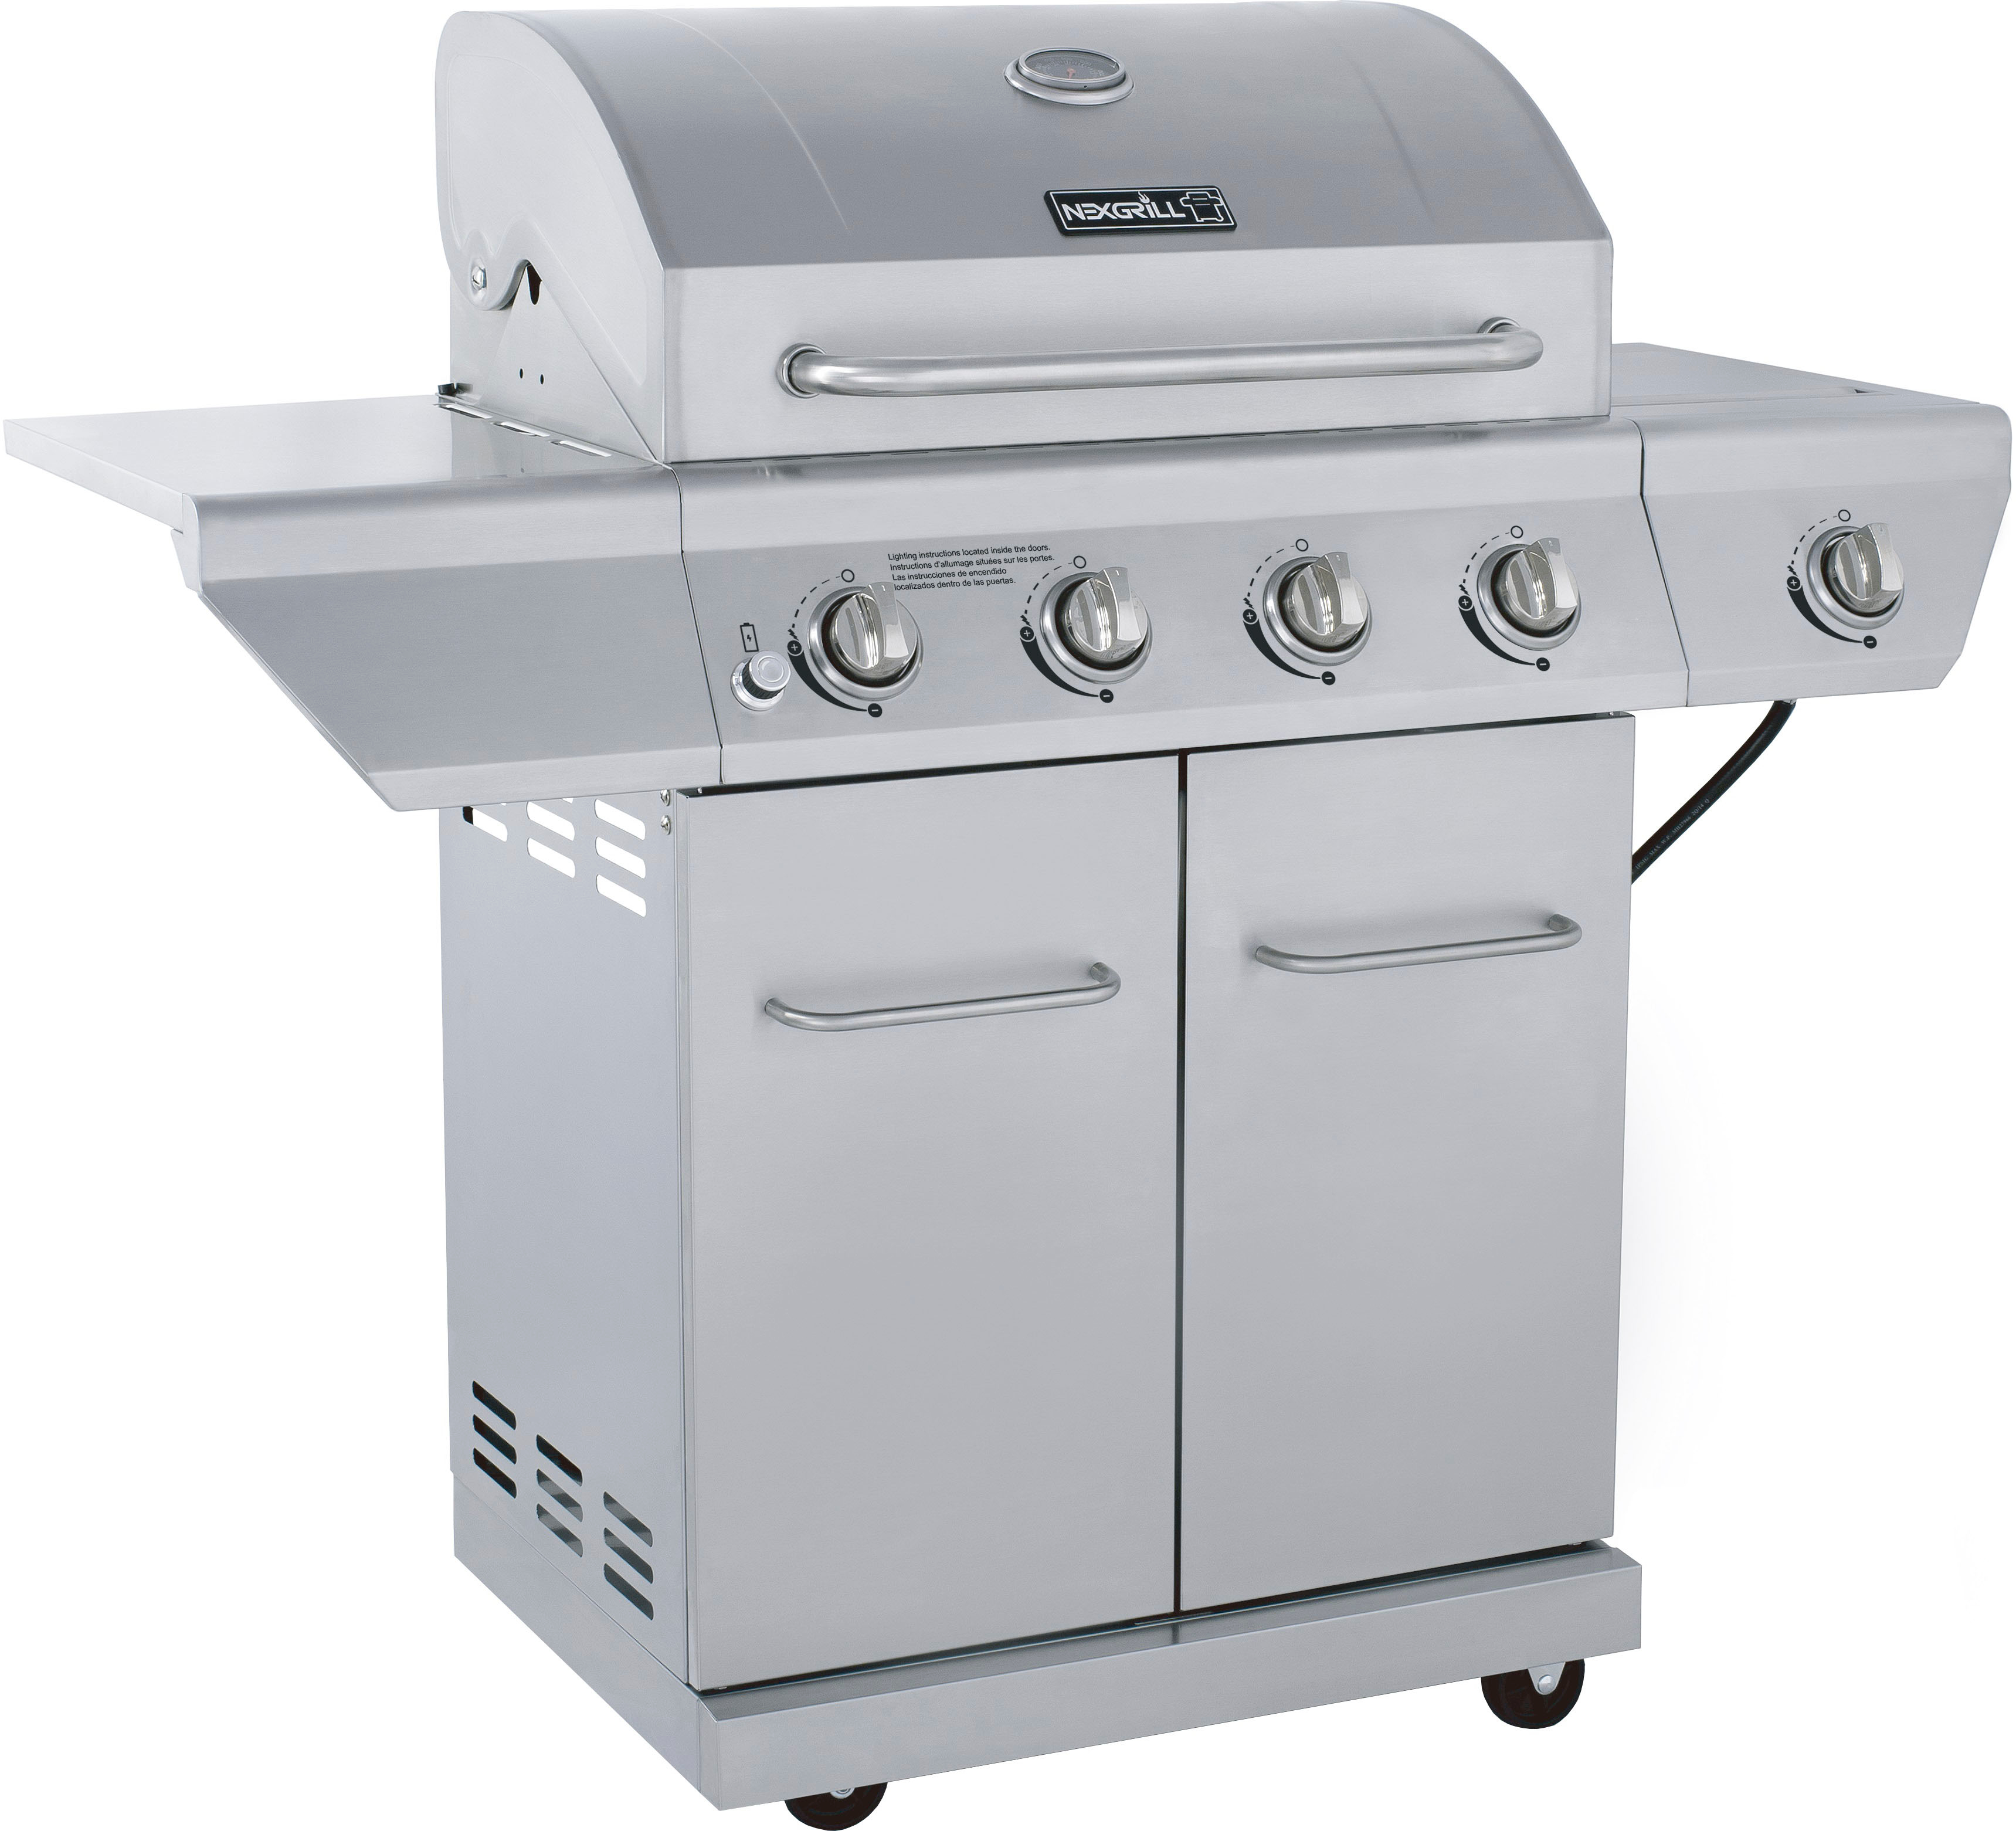 Nexgrill 7 Burner Stainless Steel Gas Barbecue + Side Bur